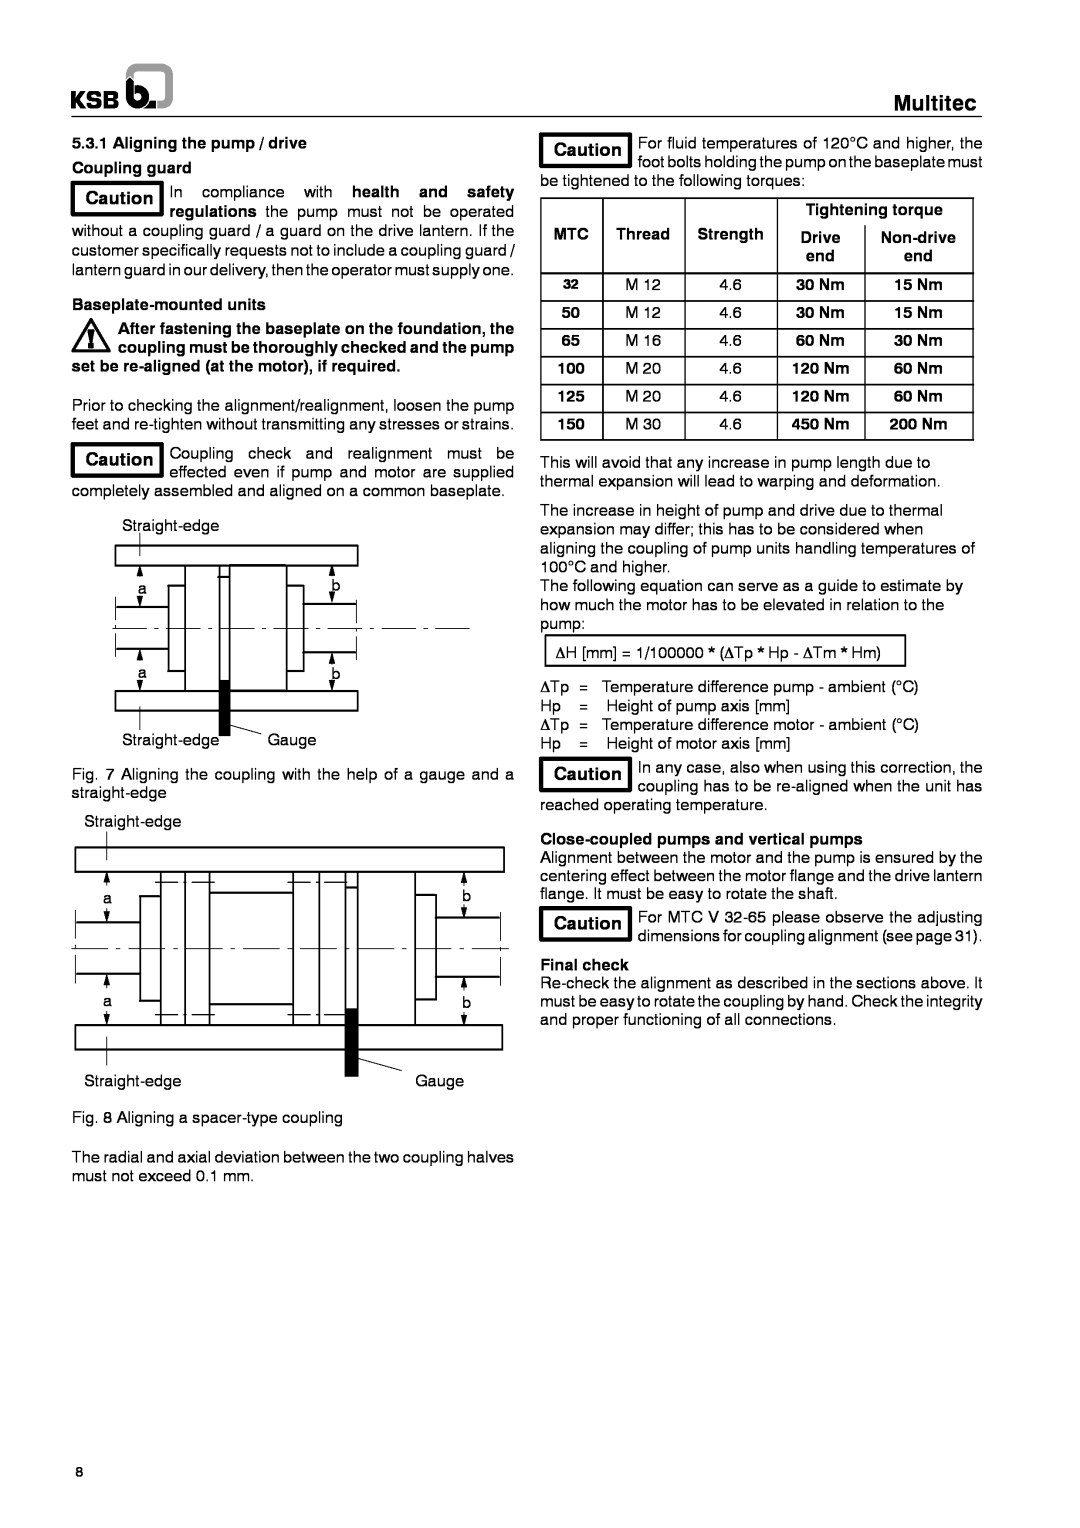 Multitech 1777.8/7-10 G3 operating instructions Multitec, 5.3.1Aligning the pump / drive Coupling guard 